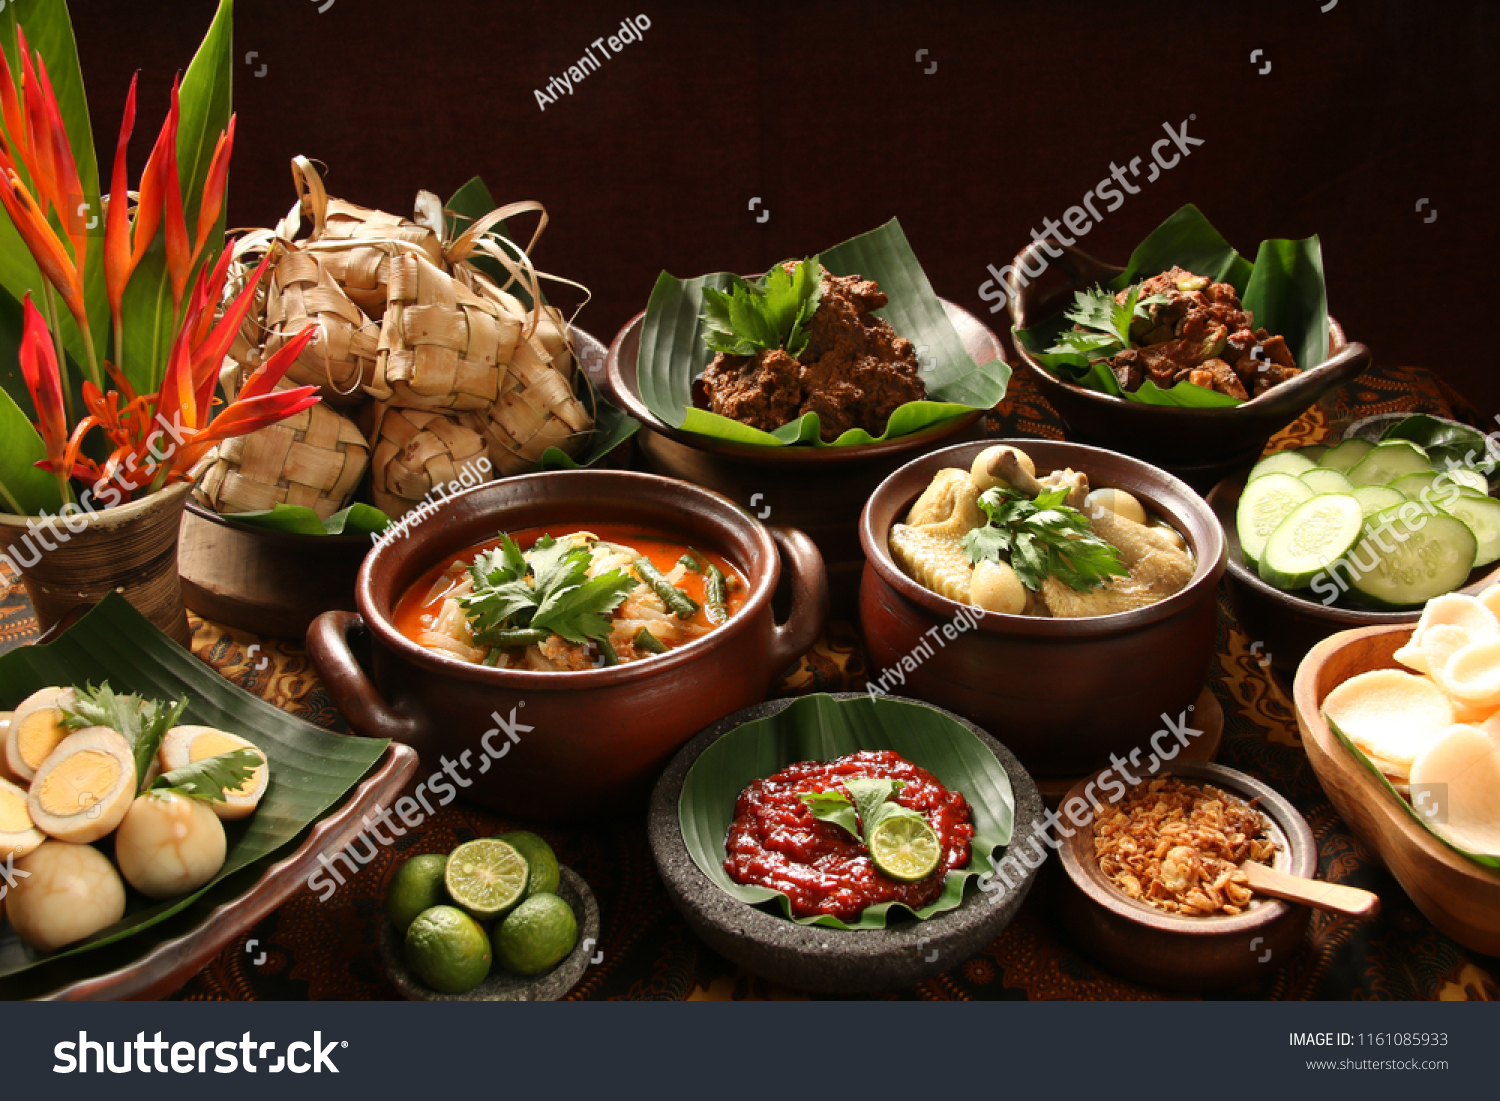 Ketupat Lebaran. Traditional celebratory dish of rice cake with several side dishes, popularly served during Eid celebrations. #1161085933